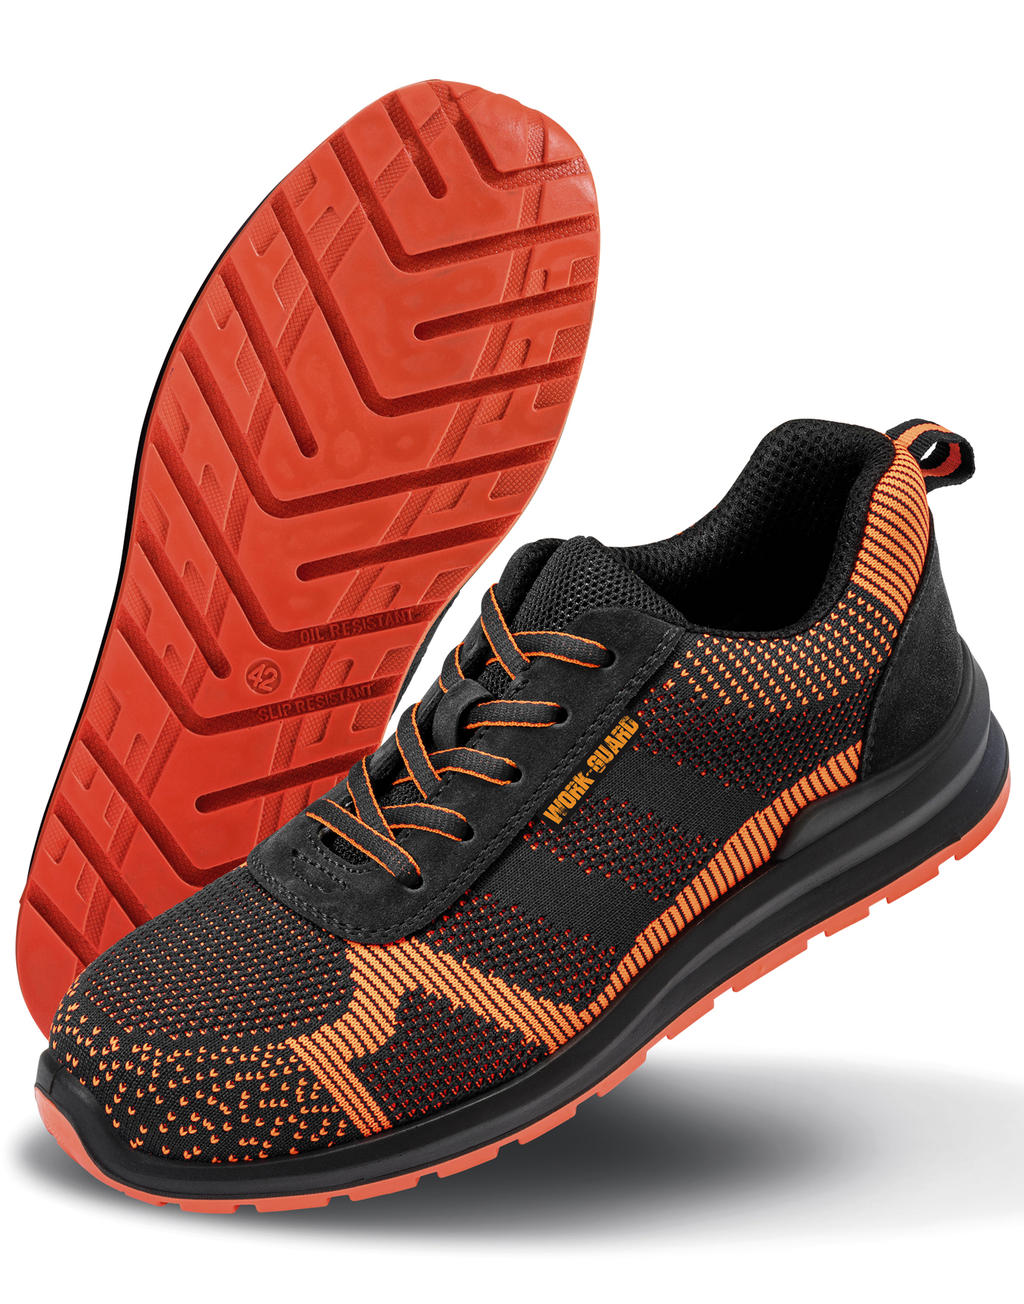  Hardy Safety Trainer - size 3 in Farbe Black/Orange